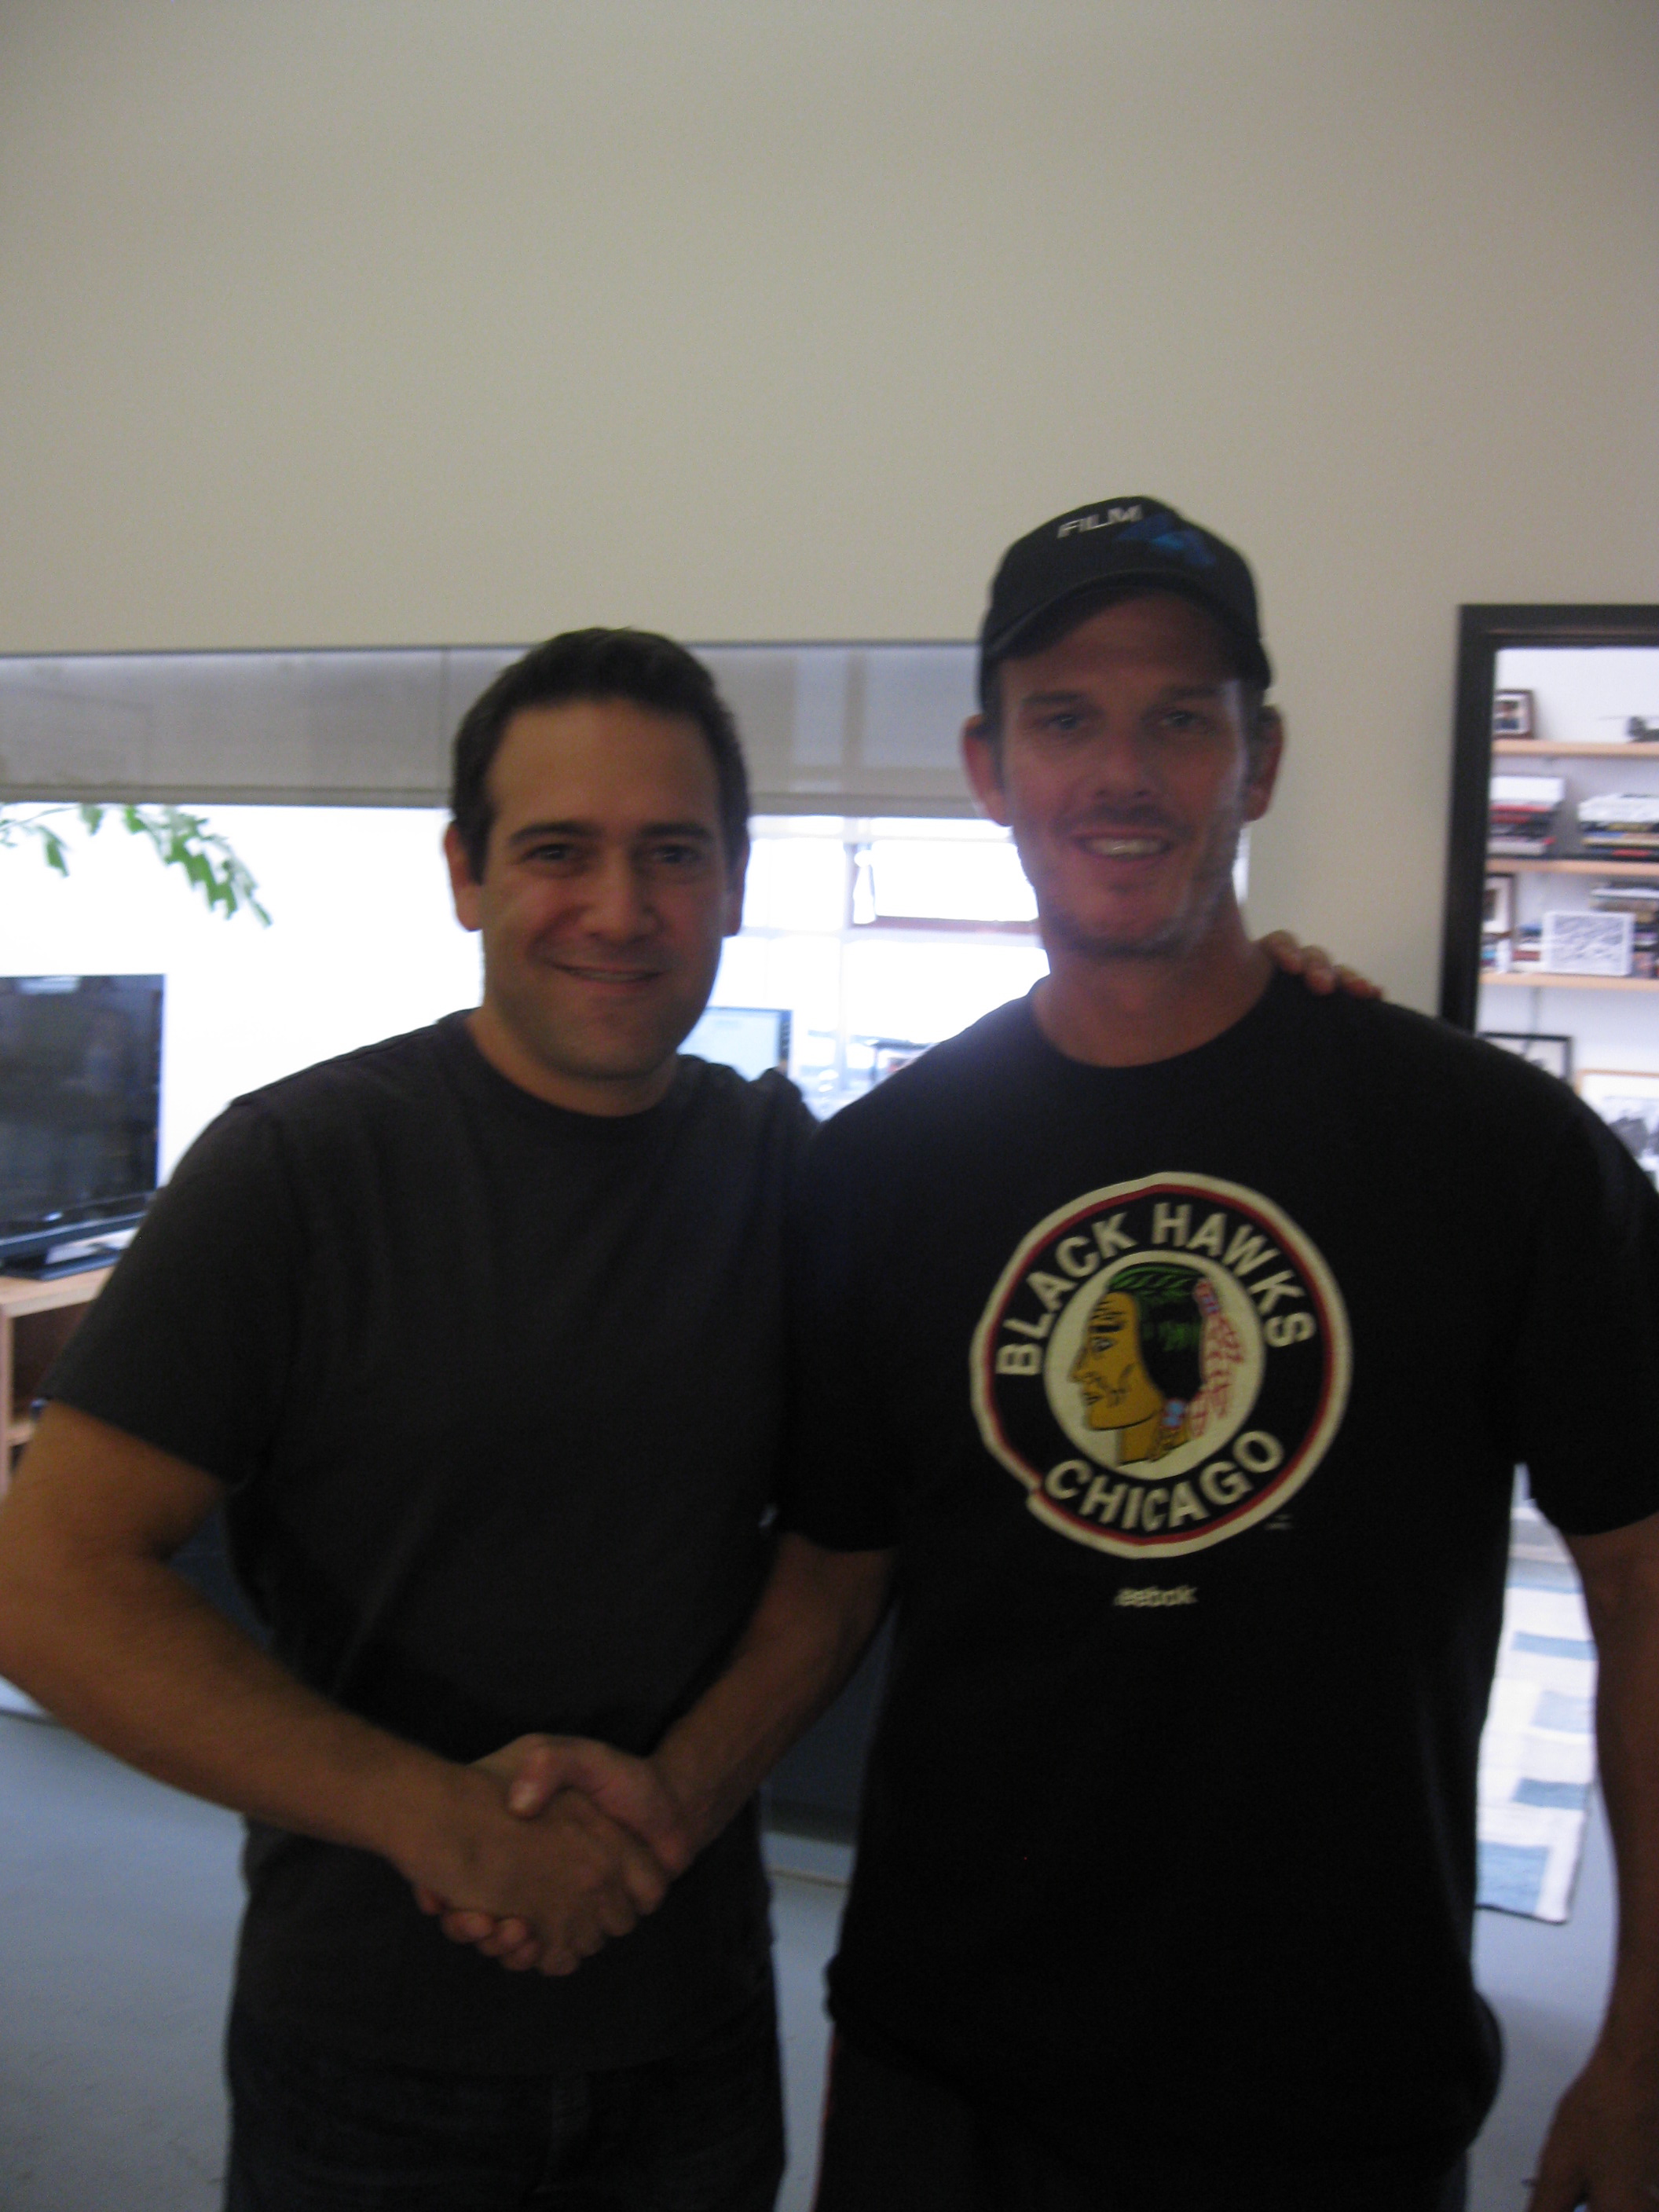 Gregg Interviews Film Director Peter Berg for his show Who's huge in sports?